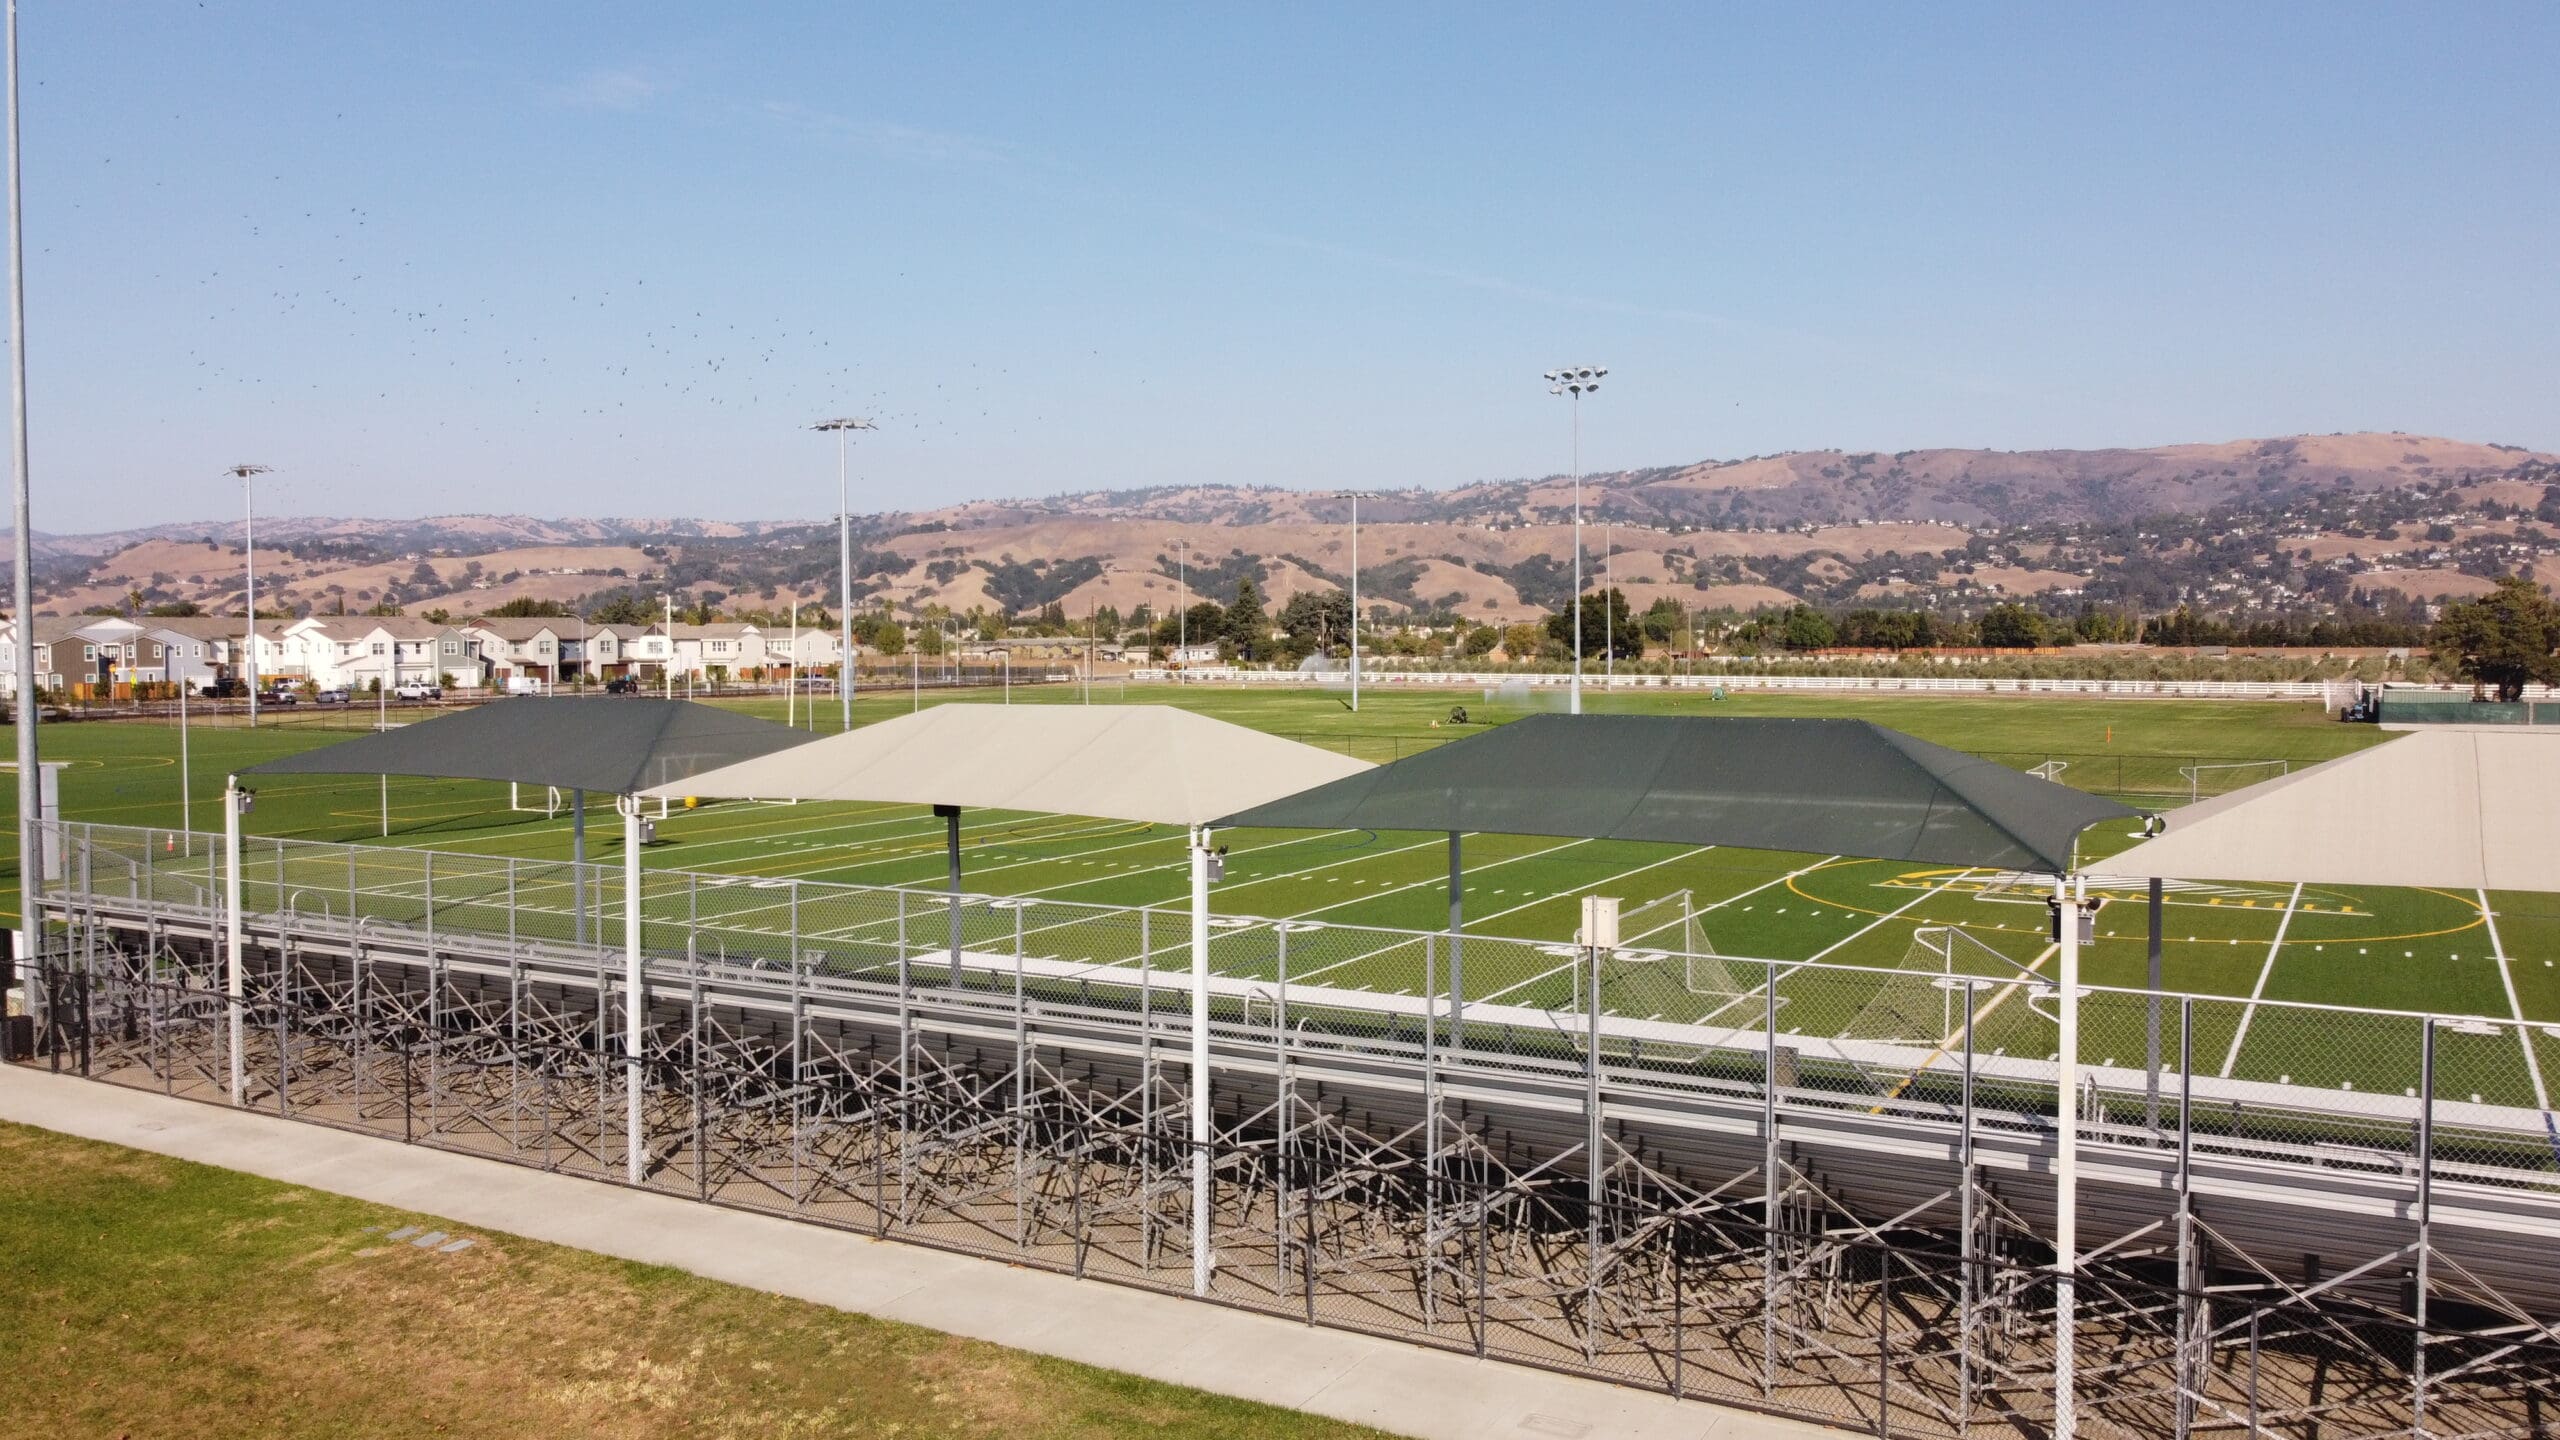 Fabric shade structures protecting bleachers at Morgan Hill Sports Center